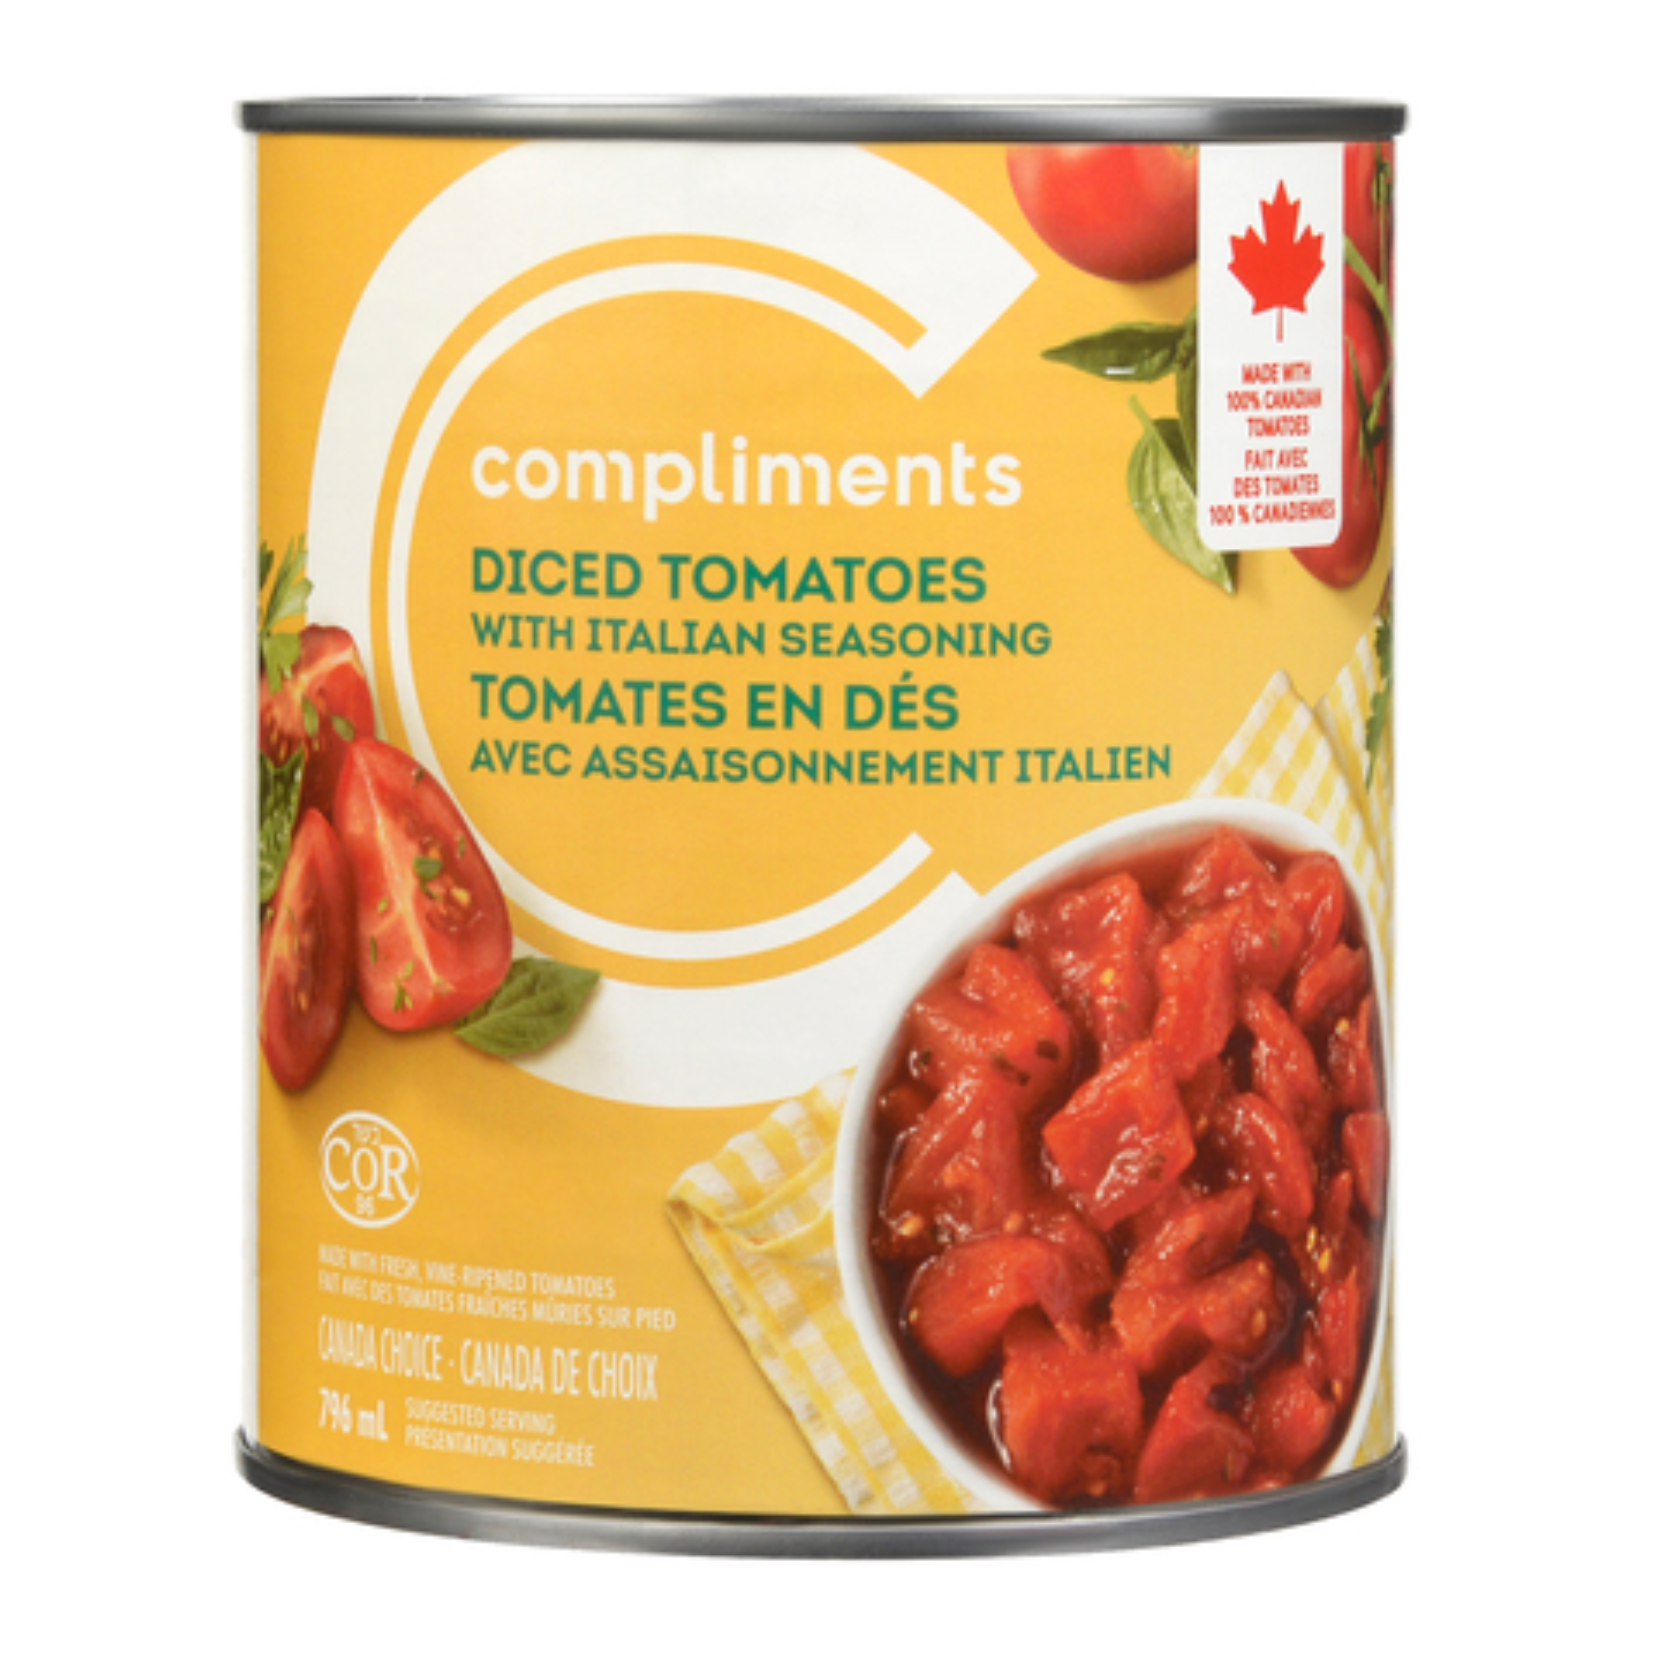 Compliments Diced Tomatoes With Italian Seasoning 796ml